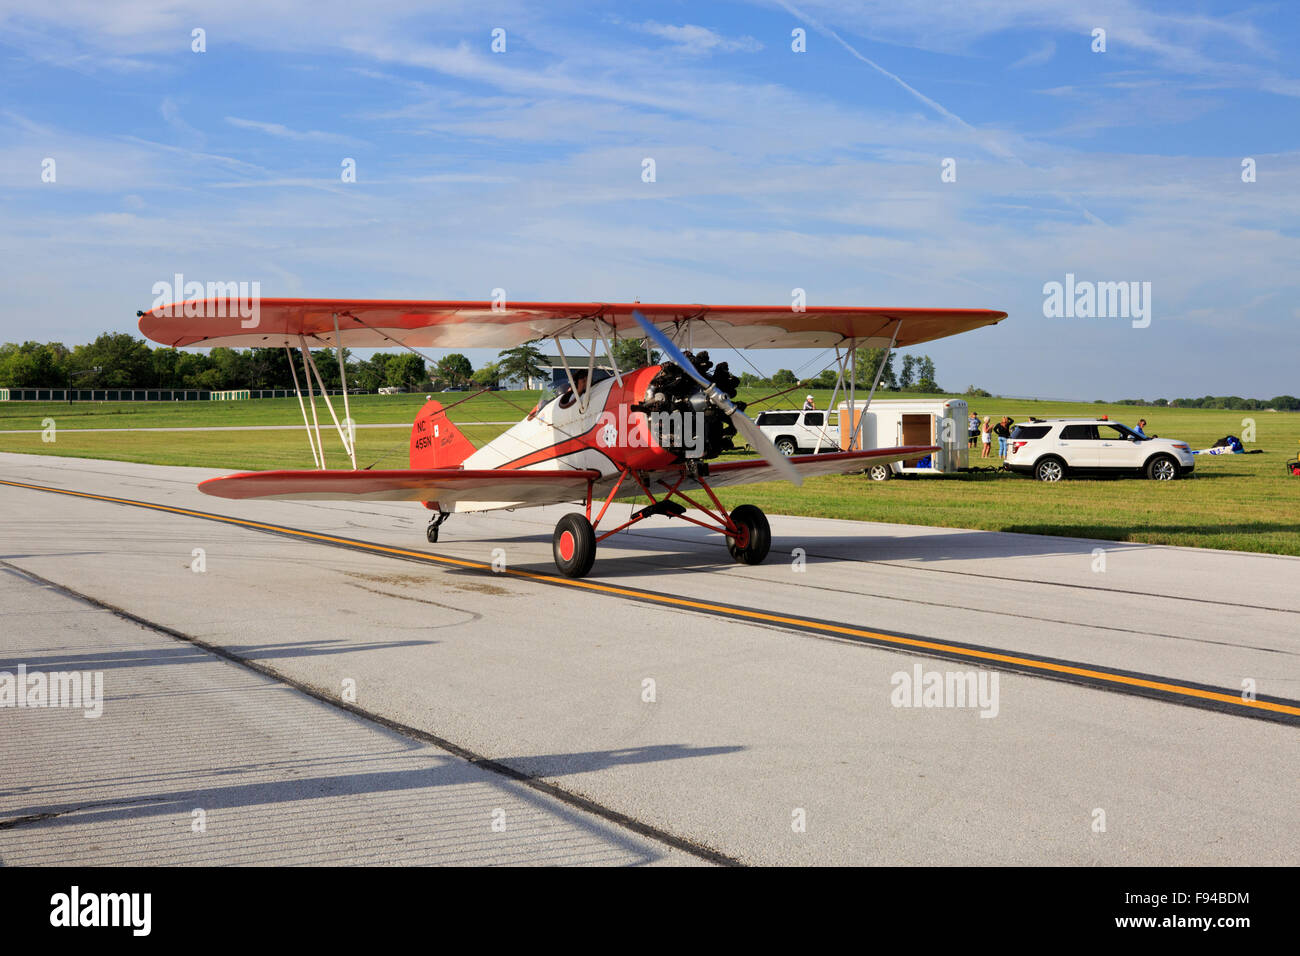 Curtiss-Wright Travel Air 4000 biplane taxiing on a runway. Stock Photo